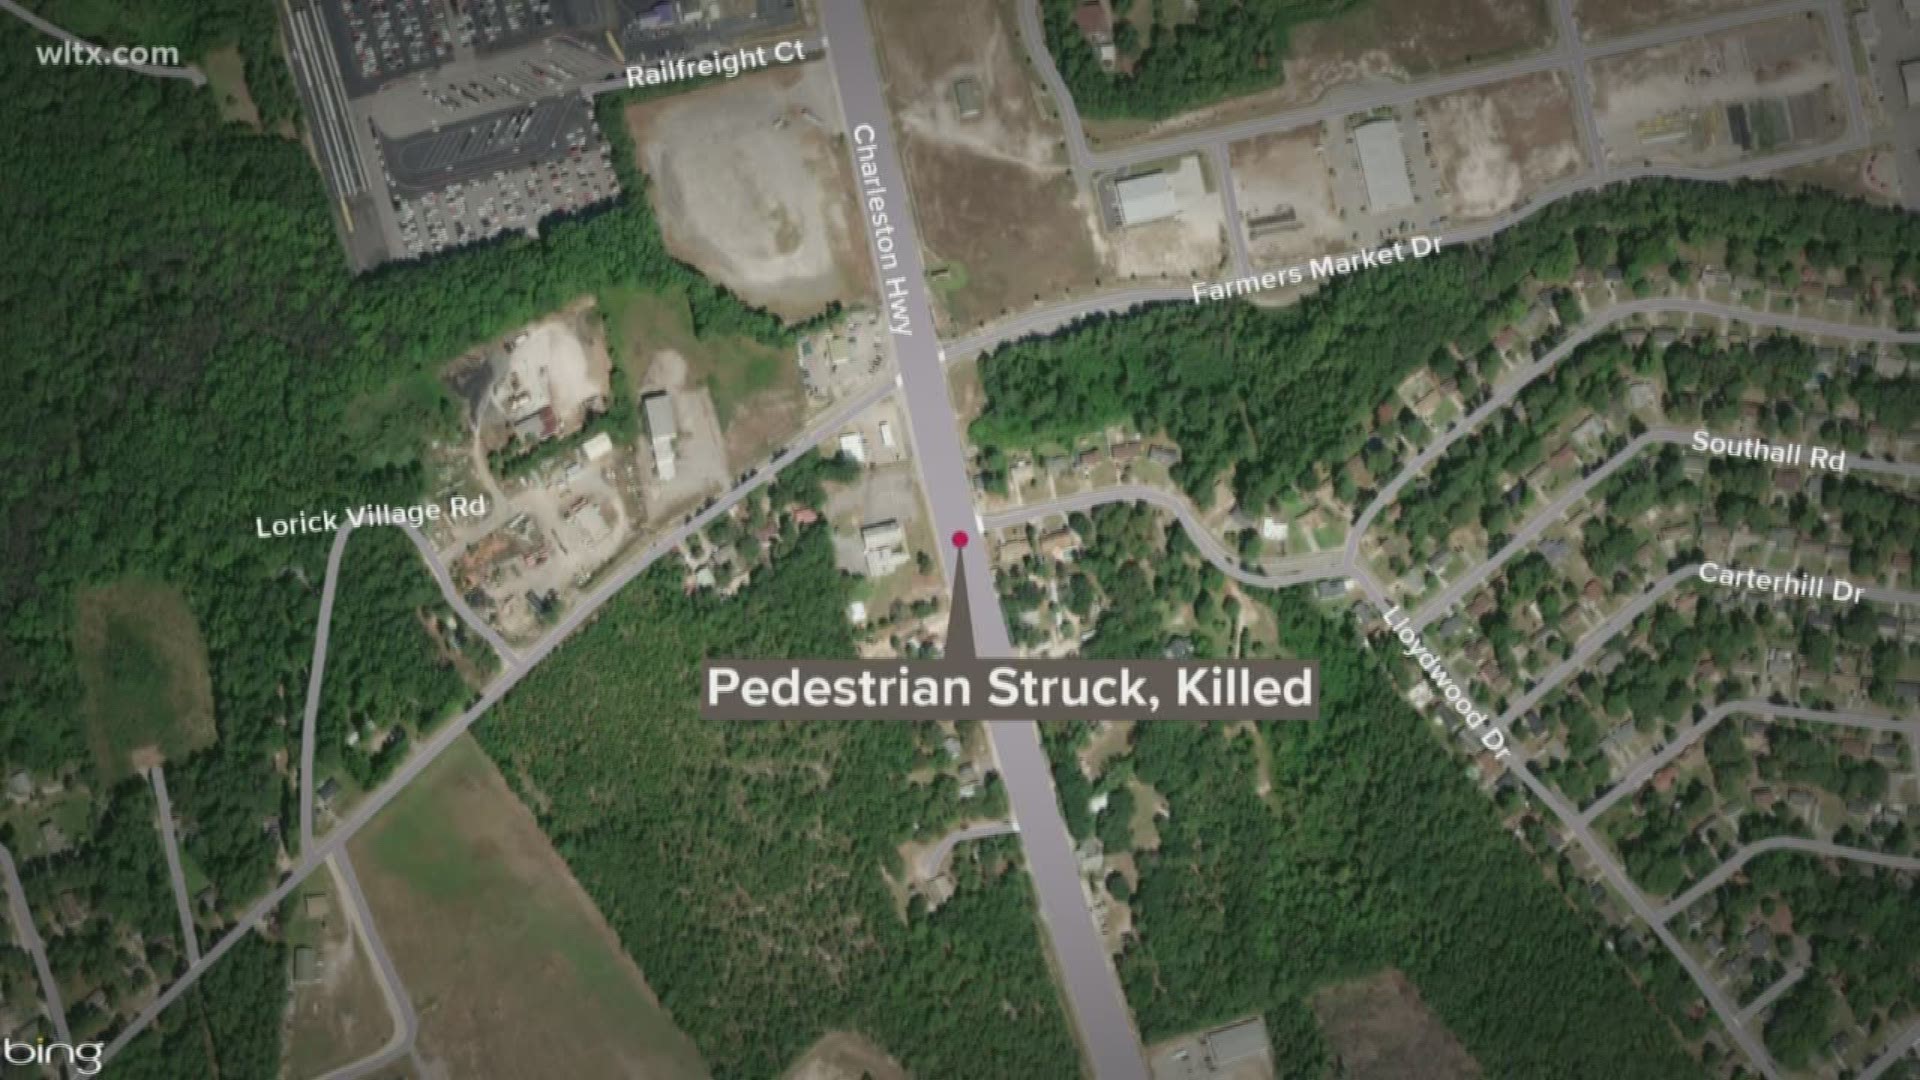 Troopers said a pedestrian was struck and killed by a motorcycle on Highway 321 in Lexington County.